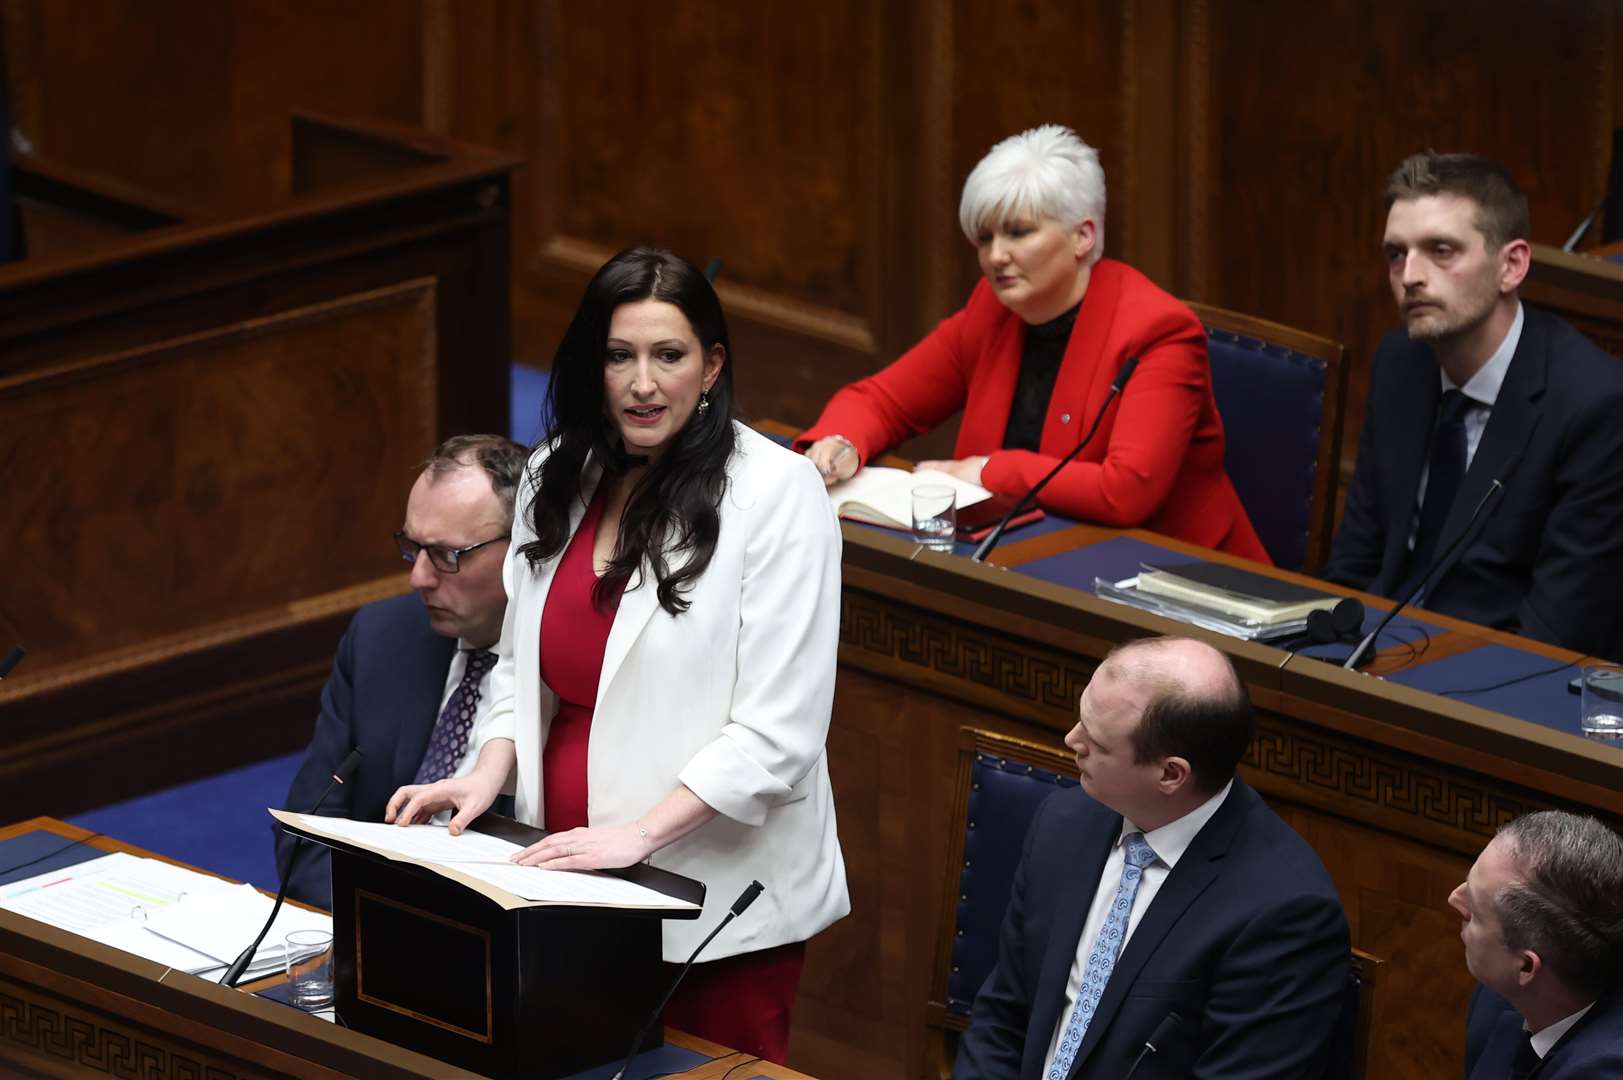 DUP MLA Emma Little-Pengelly speaking after she had been nominated to serve as Northern Ireland’s next deputy First Minister (Liam McBurney/PA)